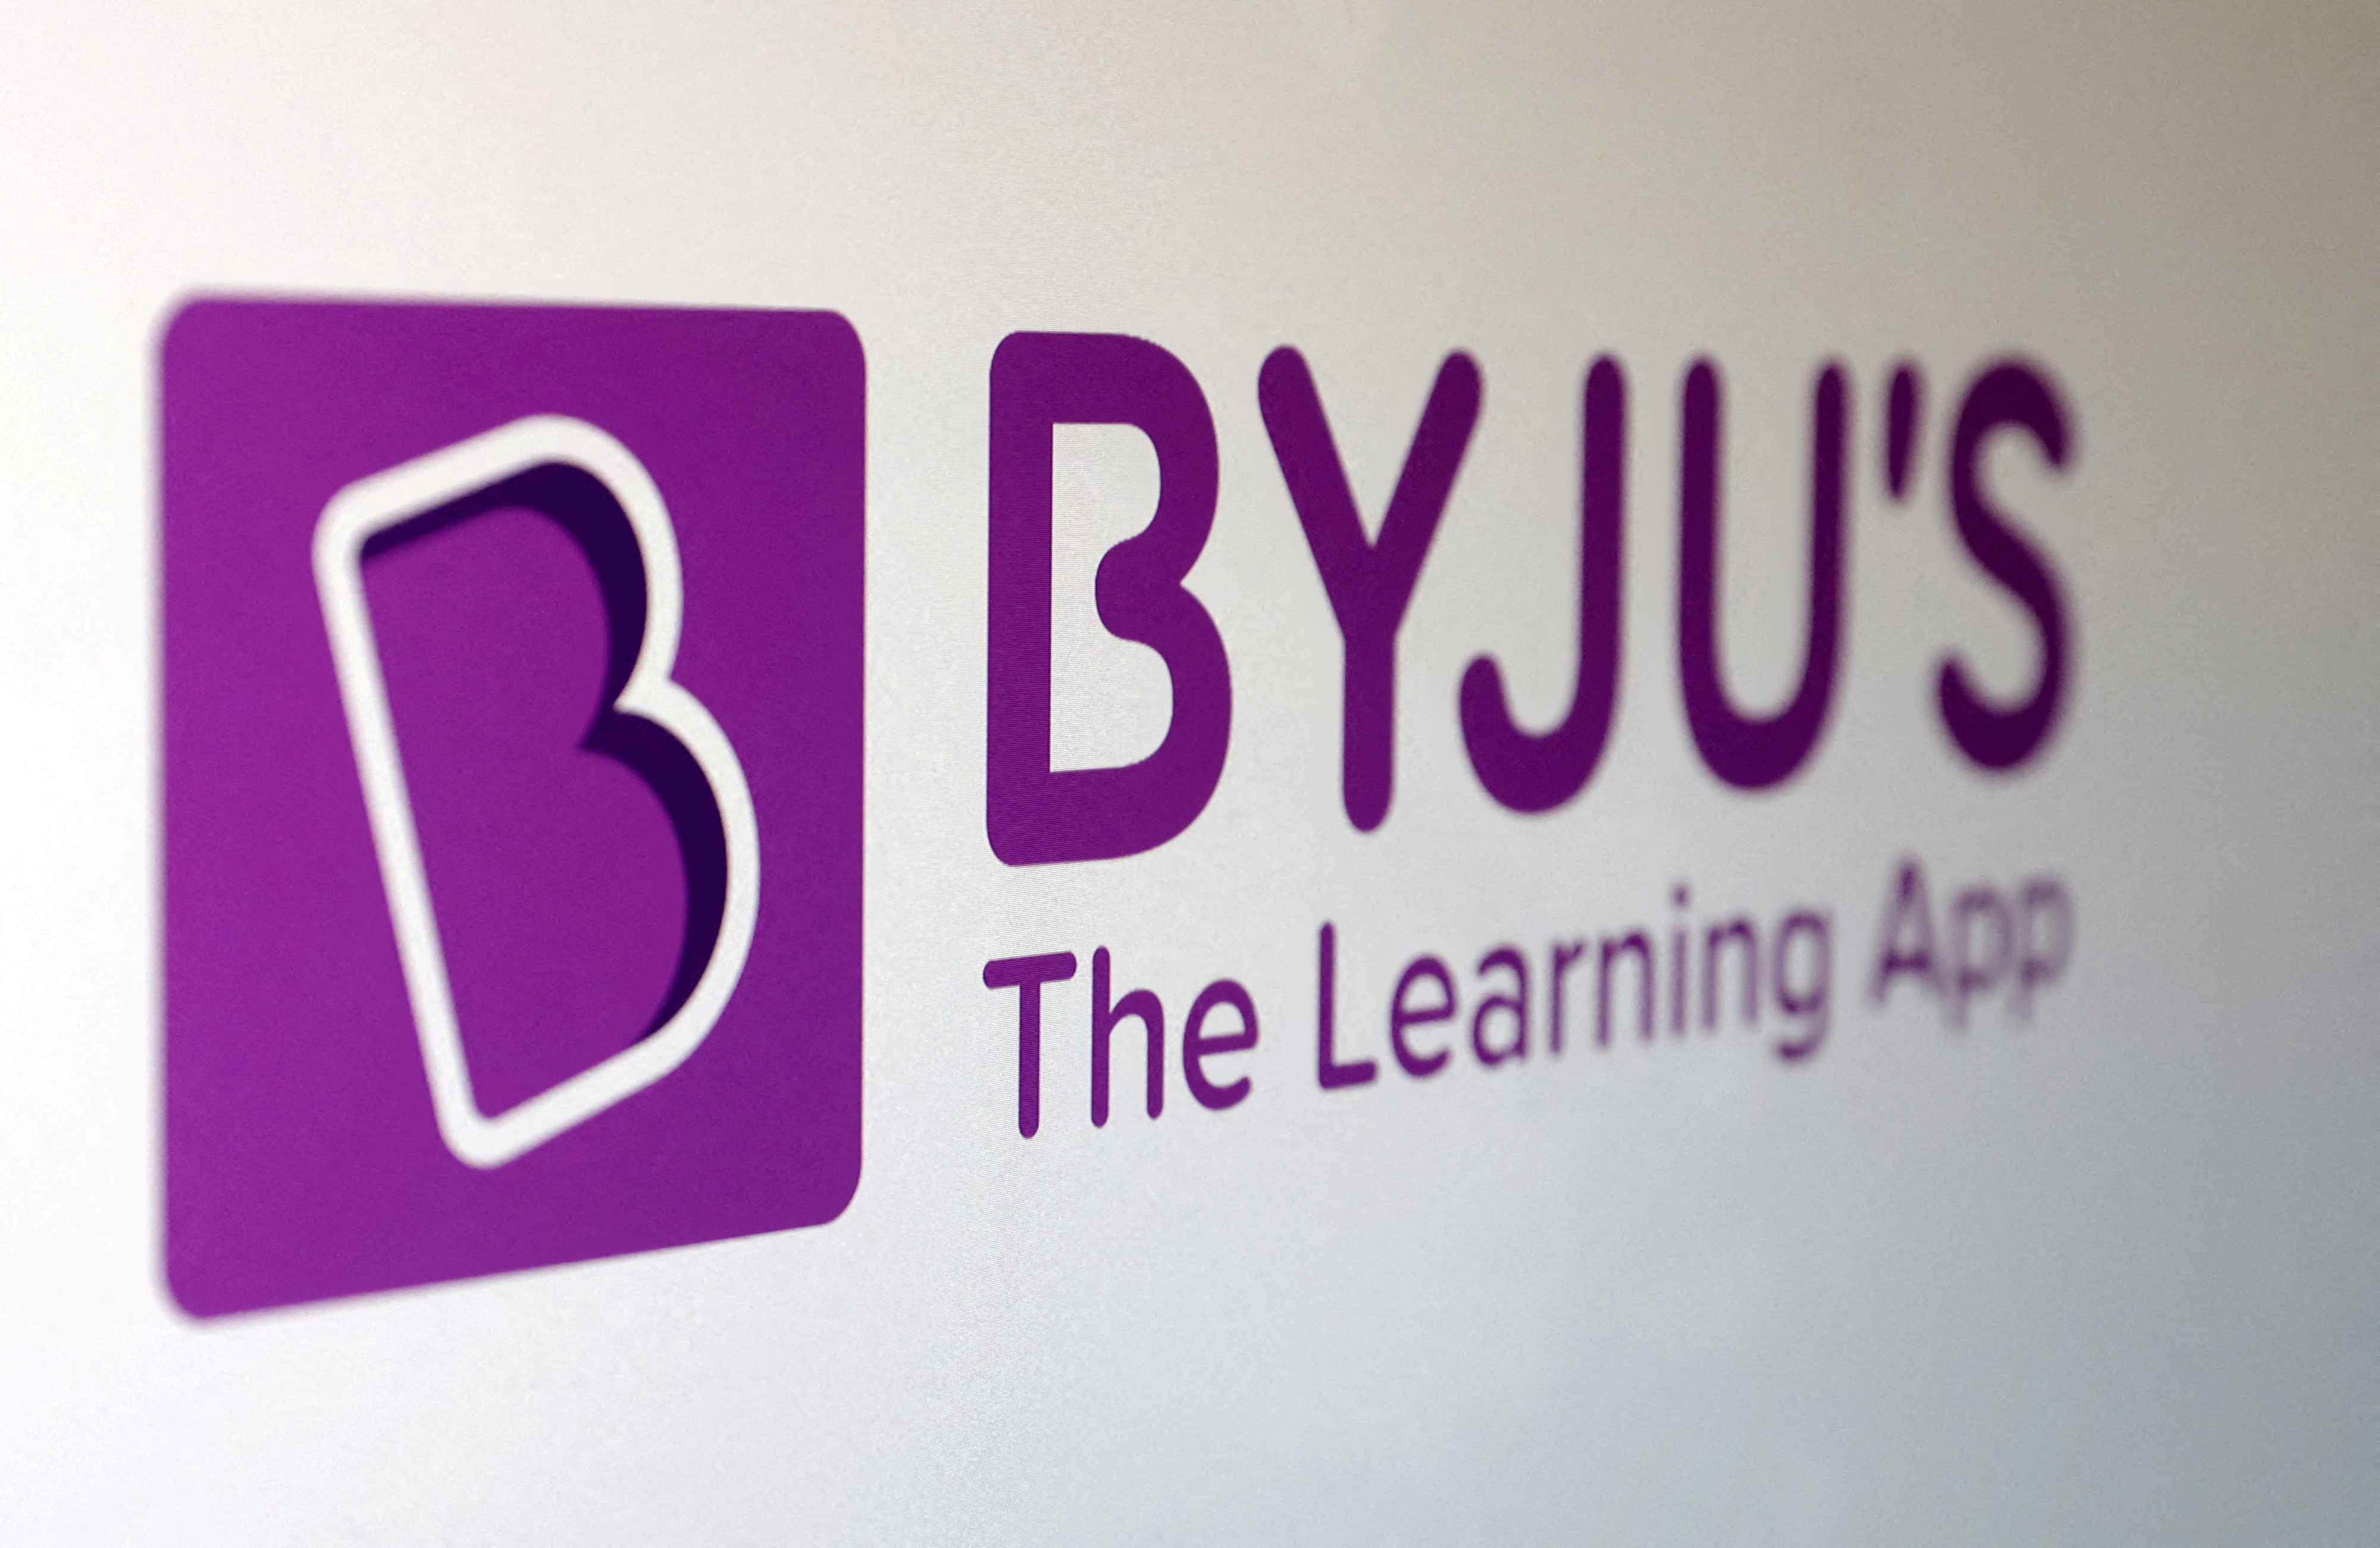 byjus employees salaries